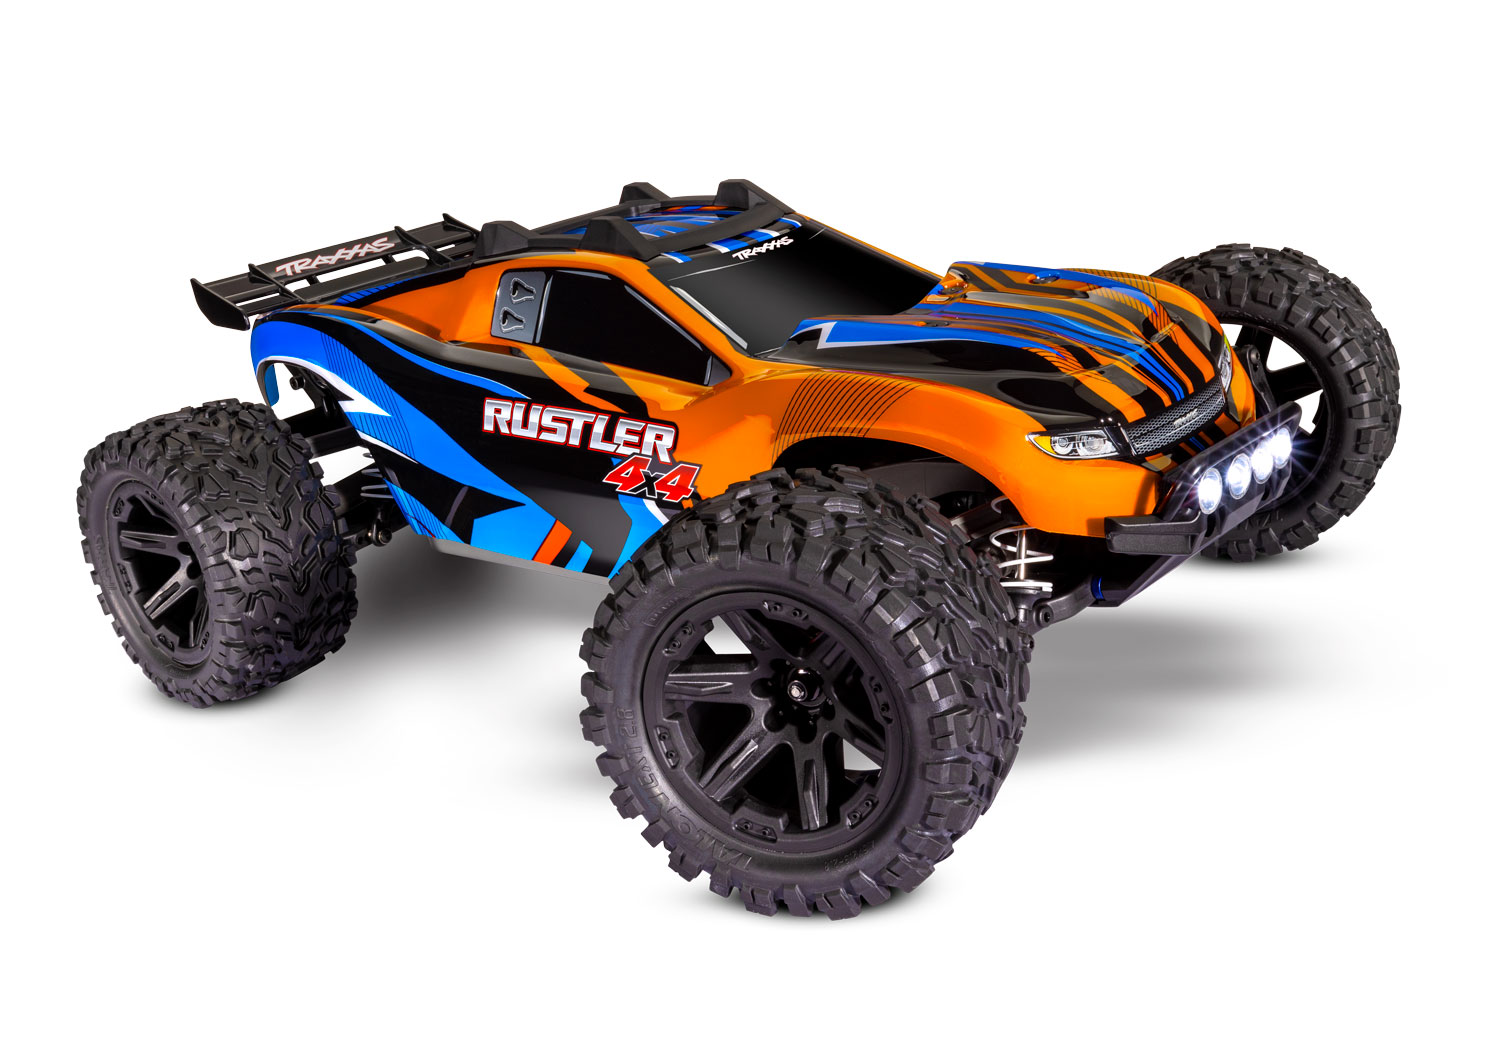 Traxxas Rustler 4x4 XL5 4WD electro truggy RTR 2.4Ghz met LED verlichting inclusief Power Pack - Oranje